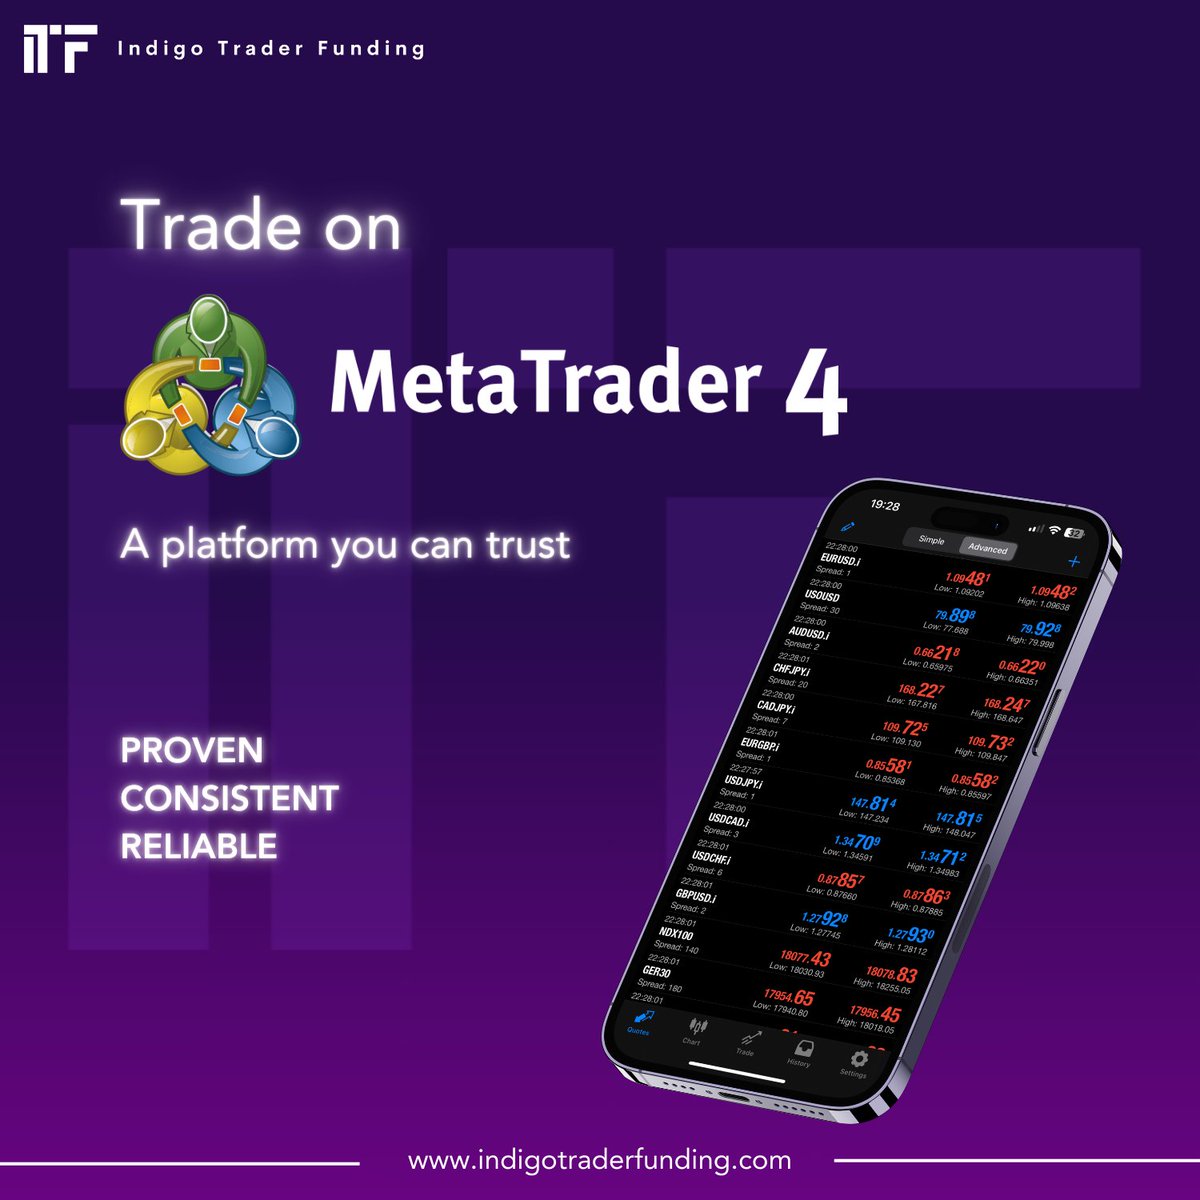 Come and trade on a reliable and trustworthy trading platform with Indigo Trader Funding. MT4 does what you need and works every time 🟪 Get started at indigotraderfunding.com